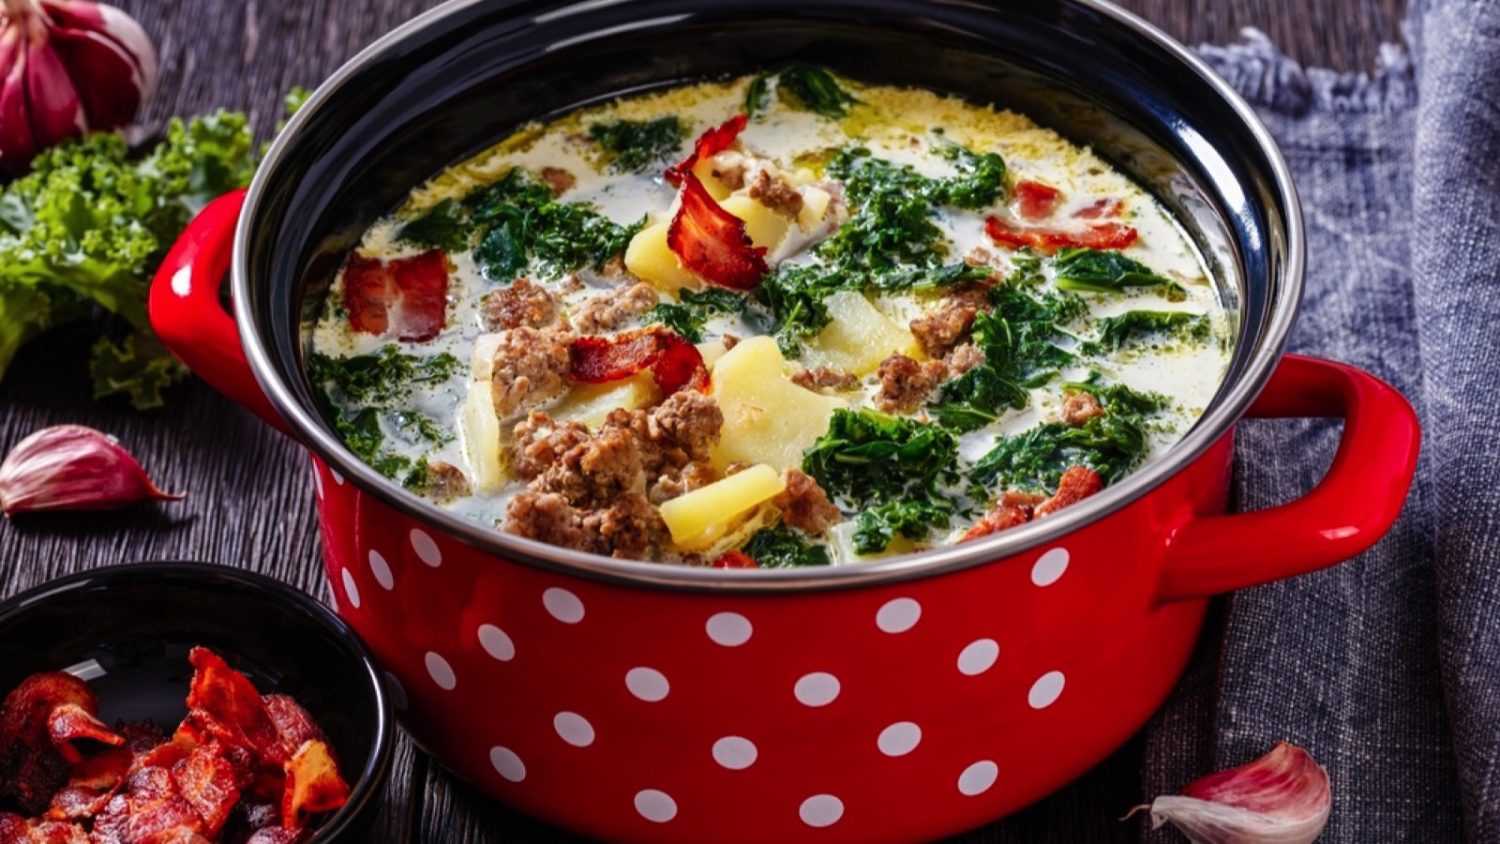 Zuppa Toscana, hearty Tuscan Soup loaded with Italian sausage, kale, fried bacon and potatoes in red pot on dark wooden table, close-up